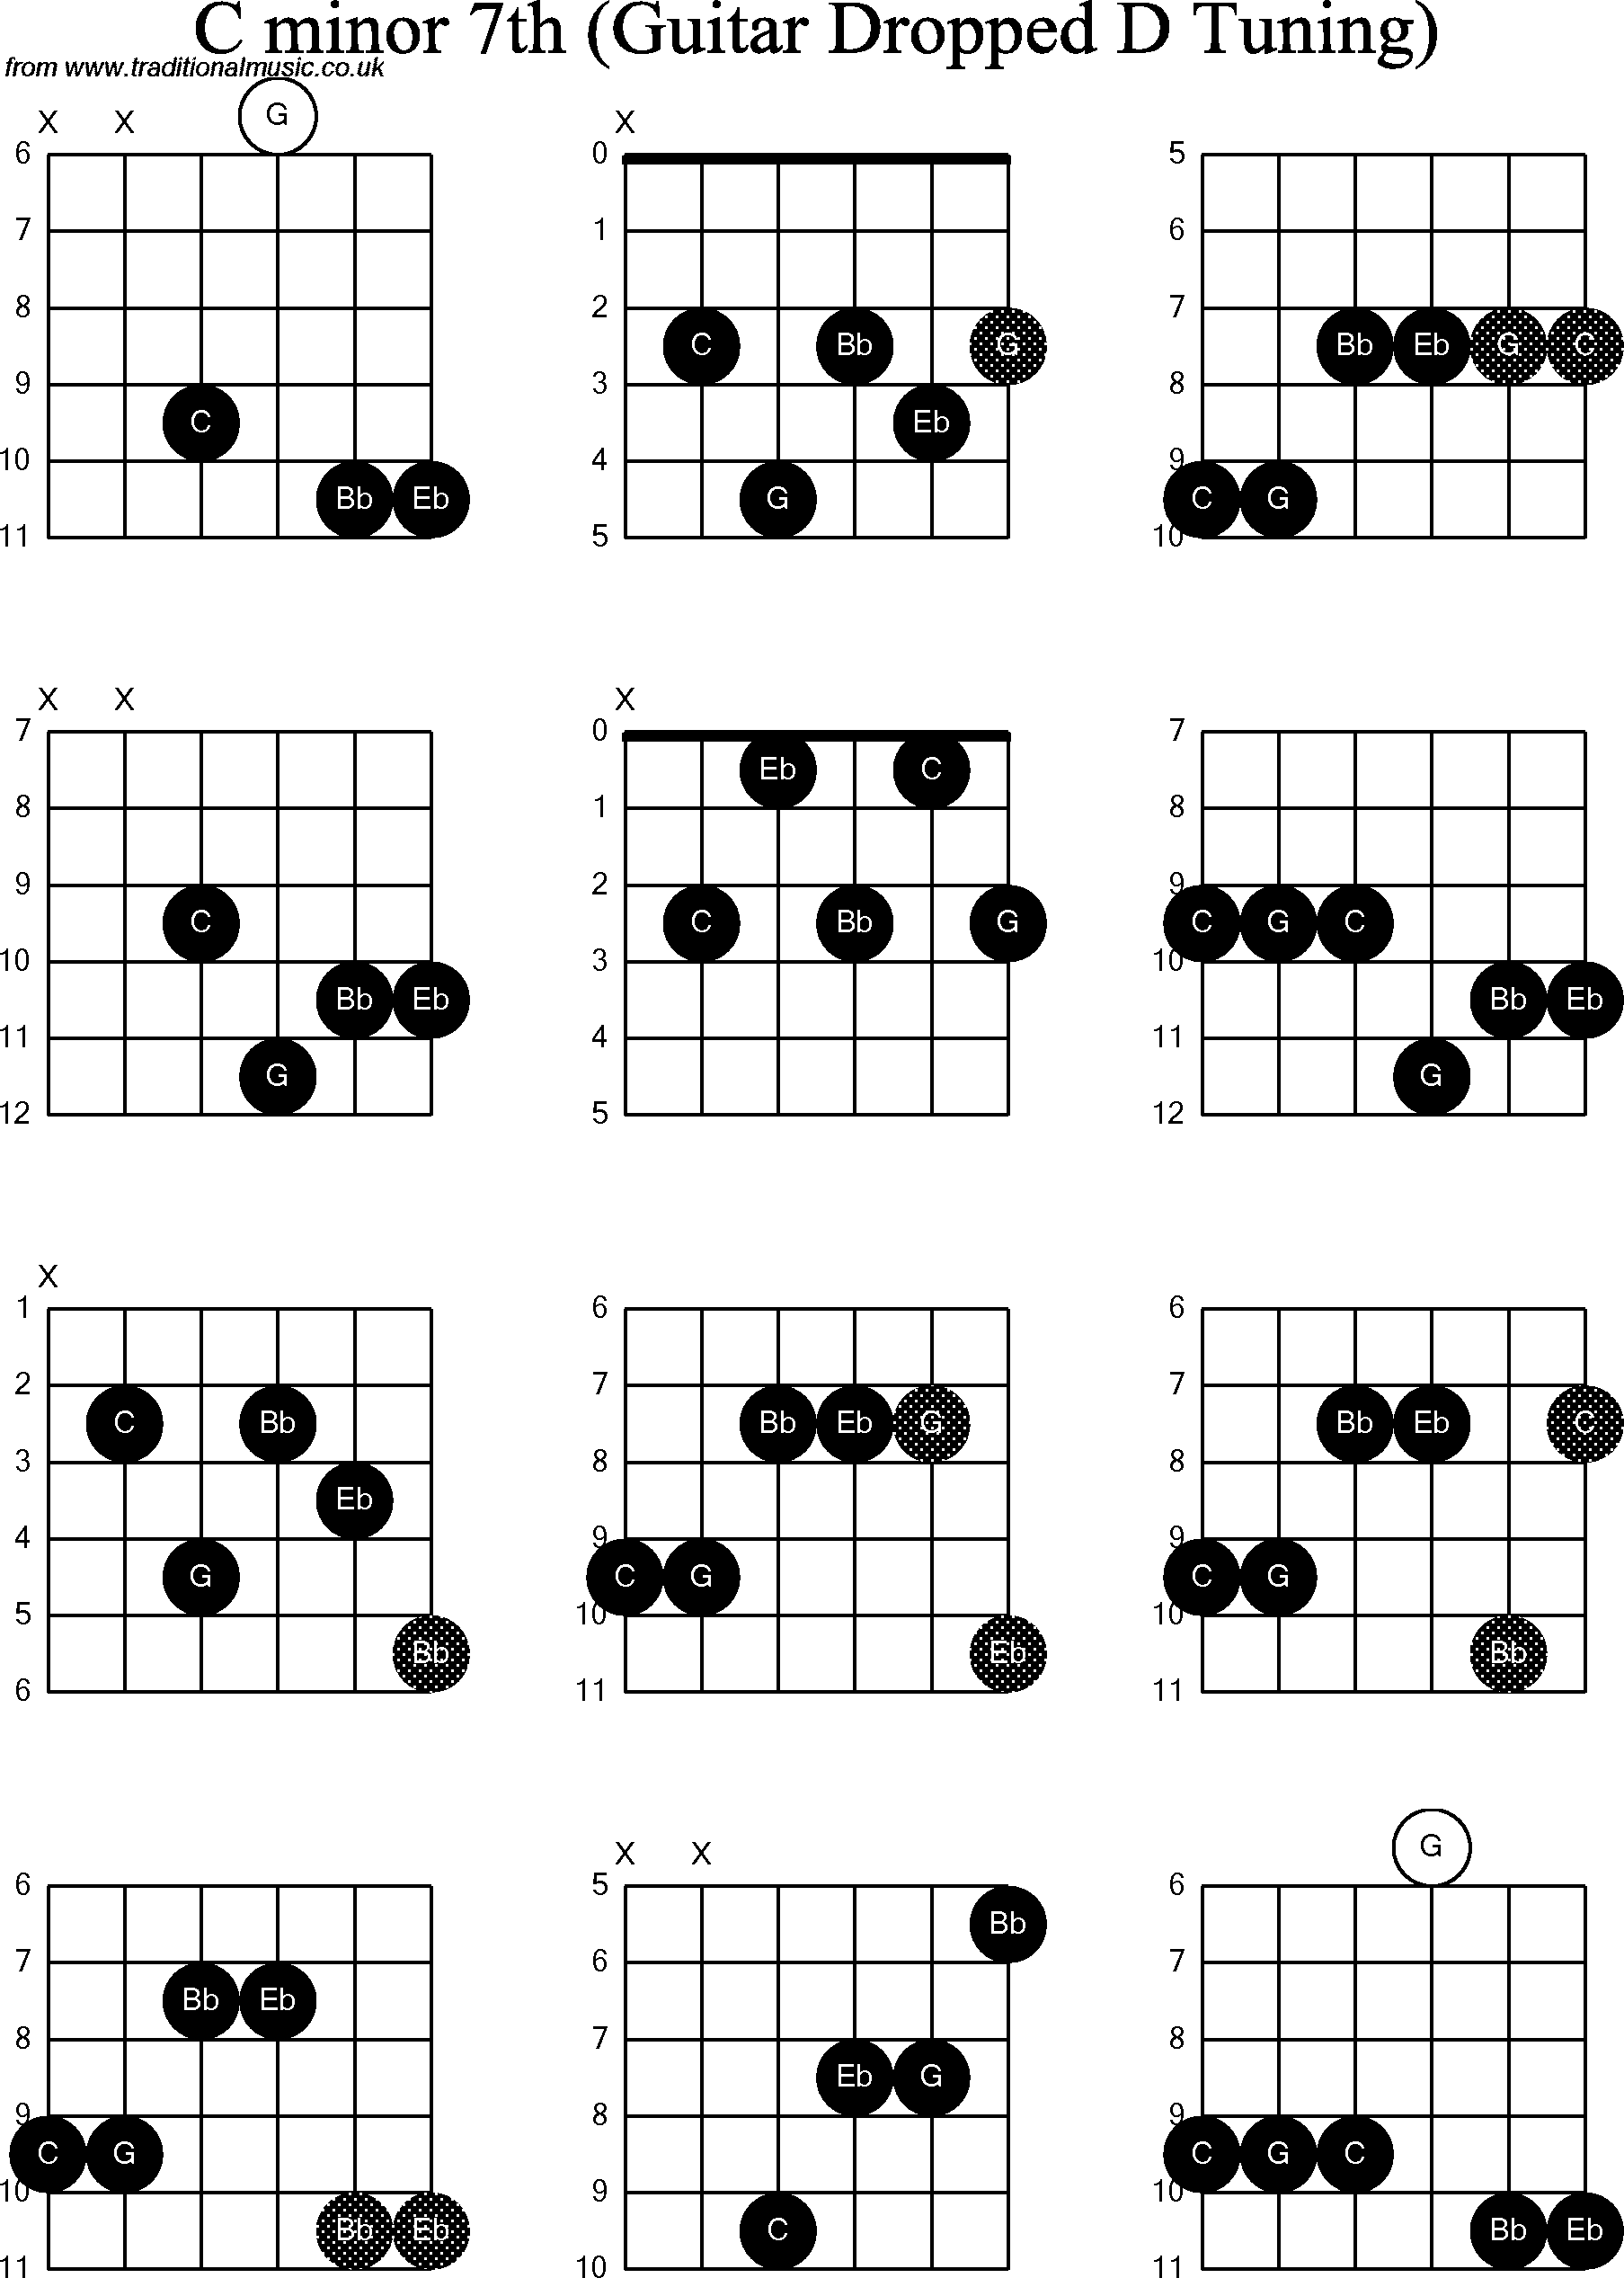 Chord diagrams for dropped D Guitar(DADGBE), C Minor7th